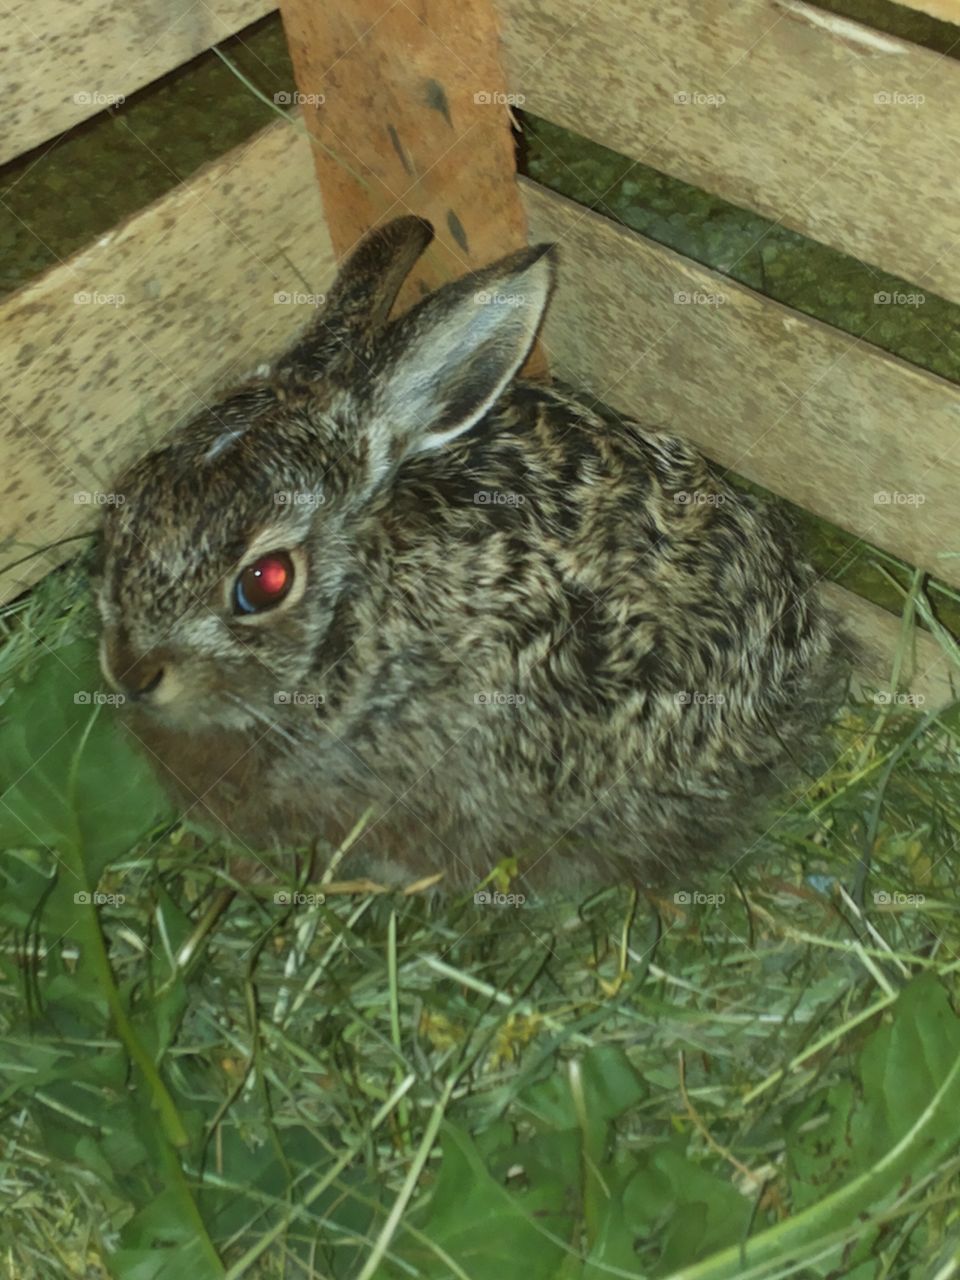 Wild rabbit. I save a wild rabbit. He is so cute.